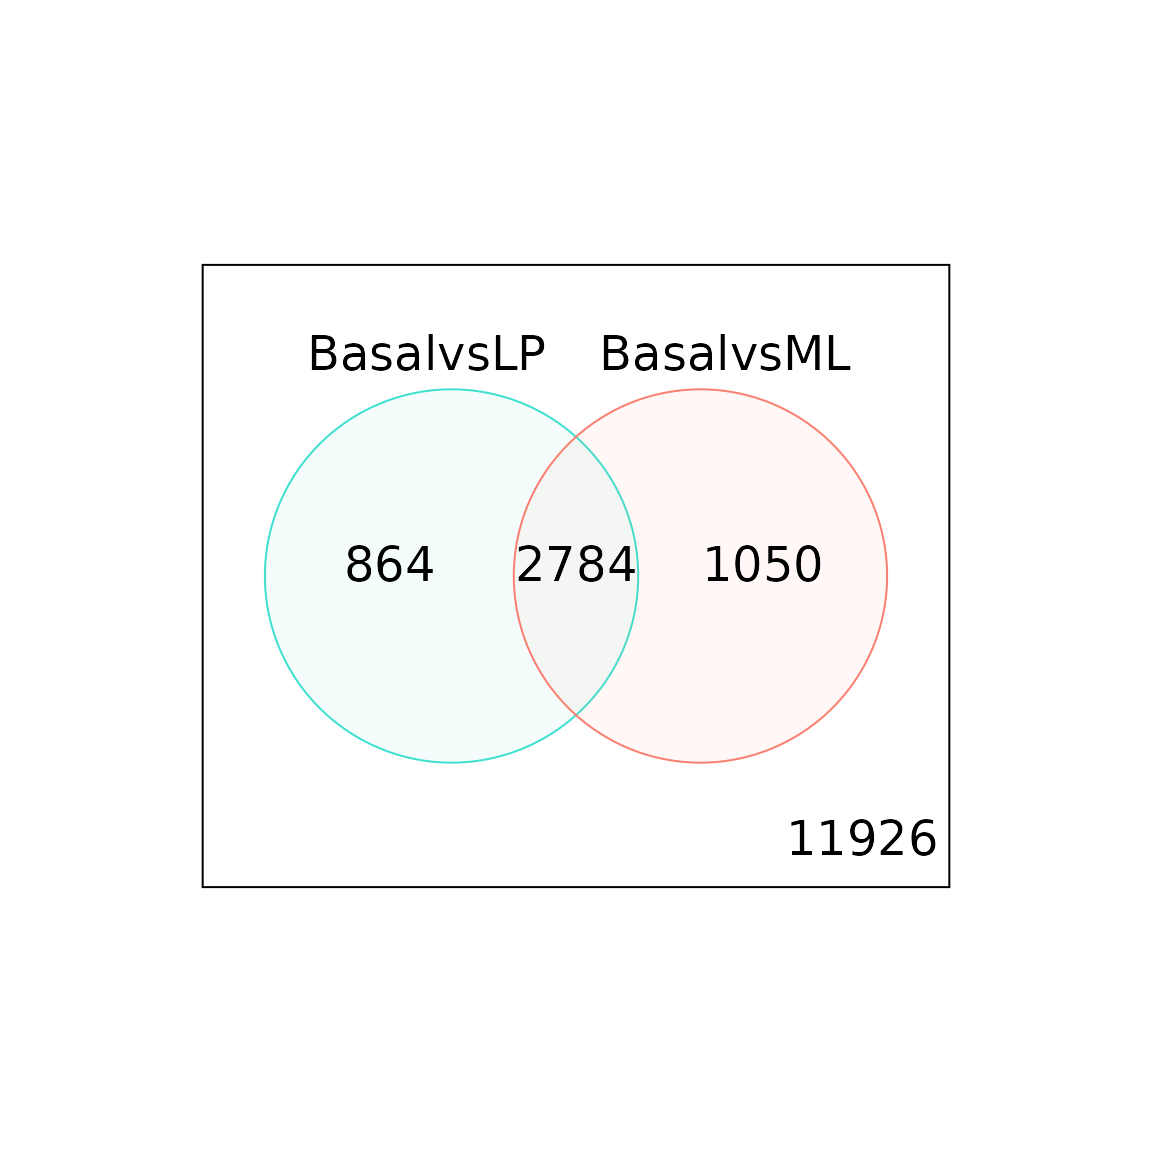 Venn diagram showing the number of genes DE in the comparison between basal versus LP only (left), basal versus ML only (right), and the number of genes that are DE in both comparisons (center). The number of genes that are not DE in either comparison are marked in the bottom-right.